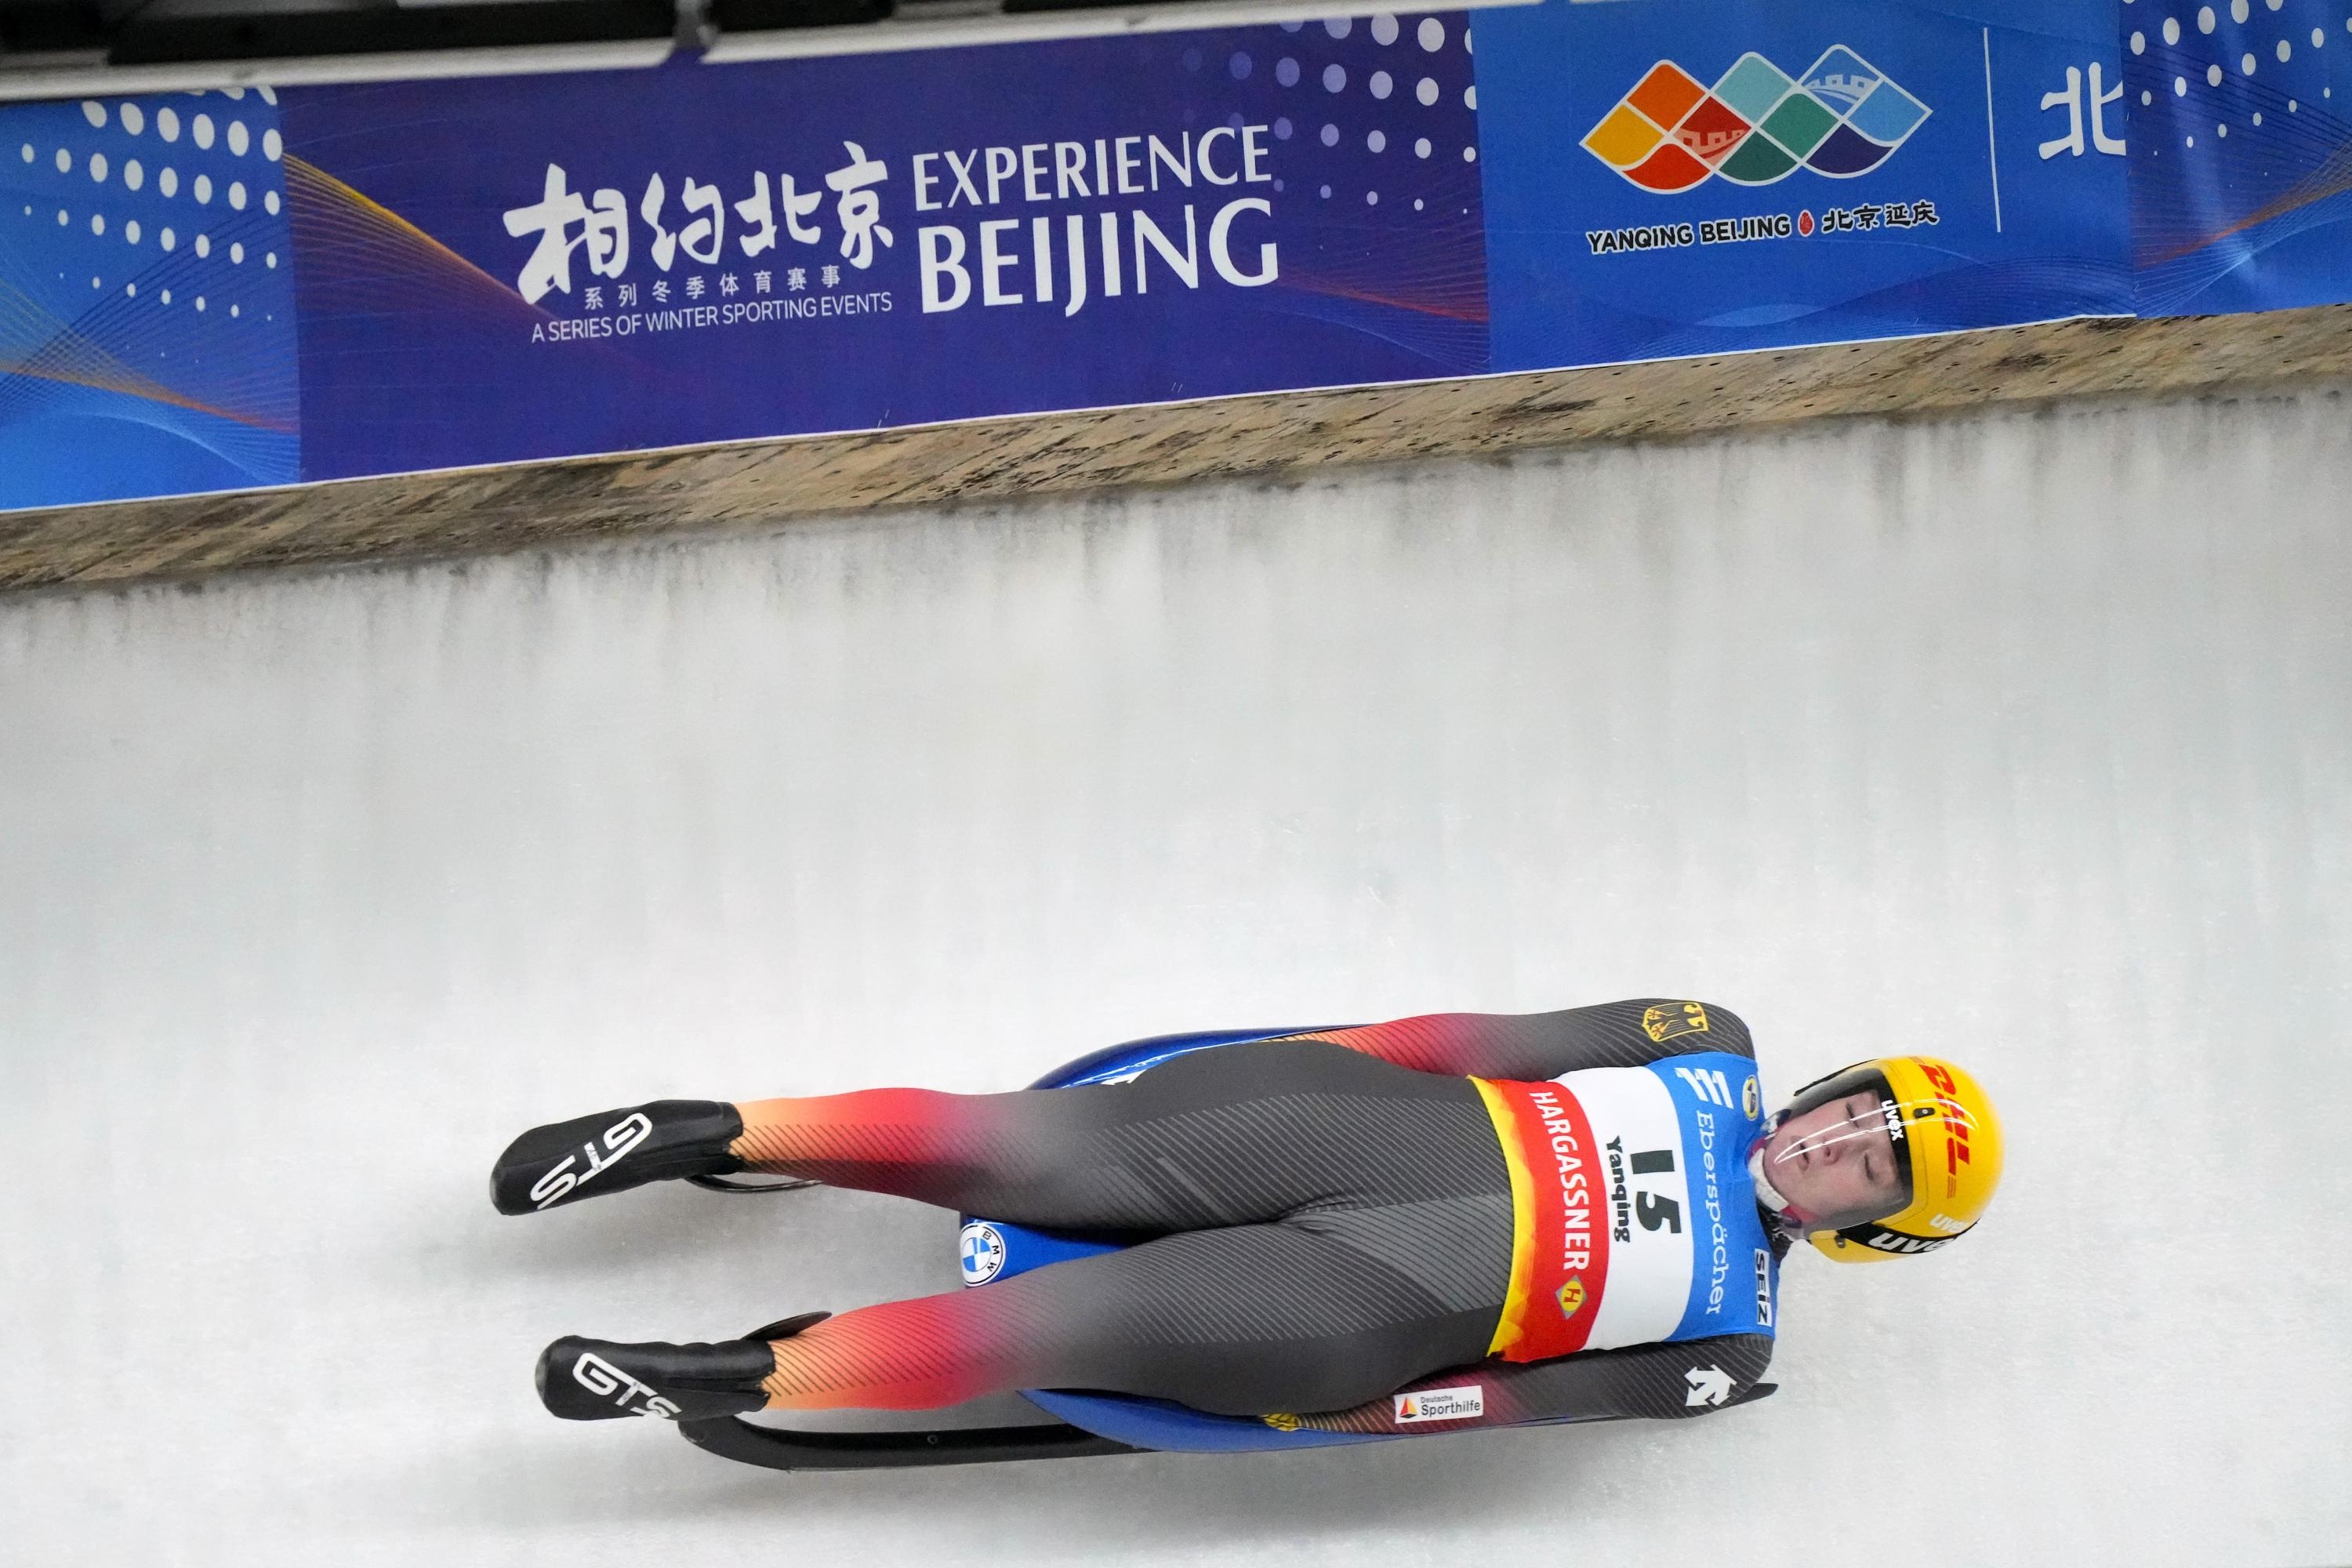 Luge: Anna Berreiter, A two-time Under-23 World Champion, The 2022 Winter Olympics silver medalist. 3000x2000 HD Background.